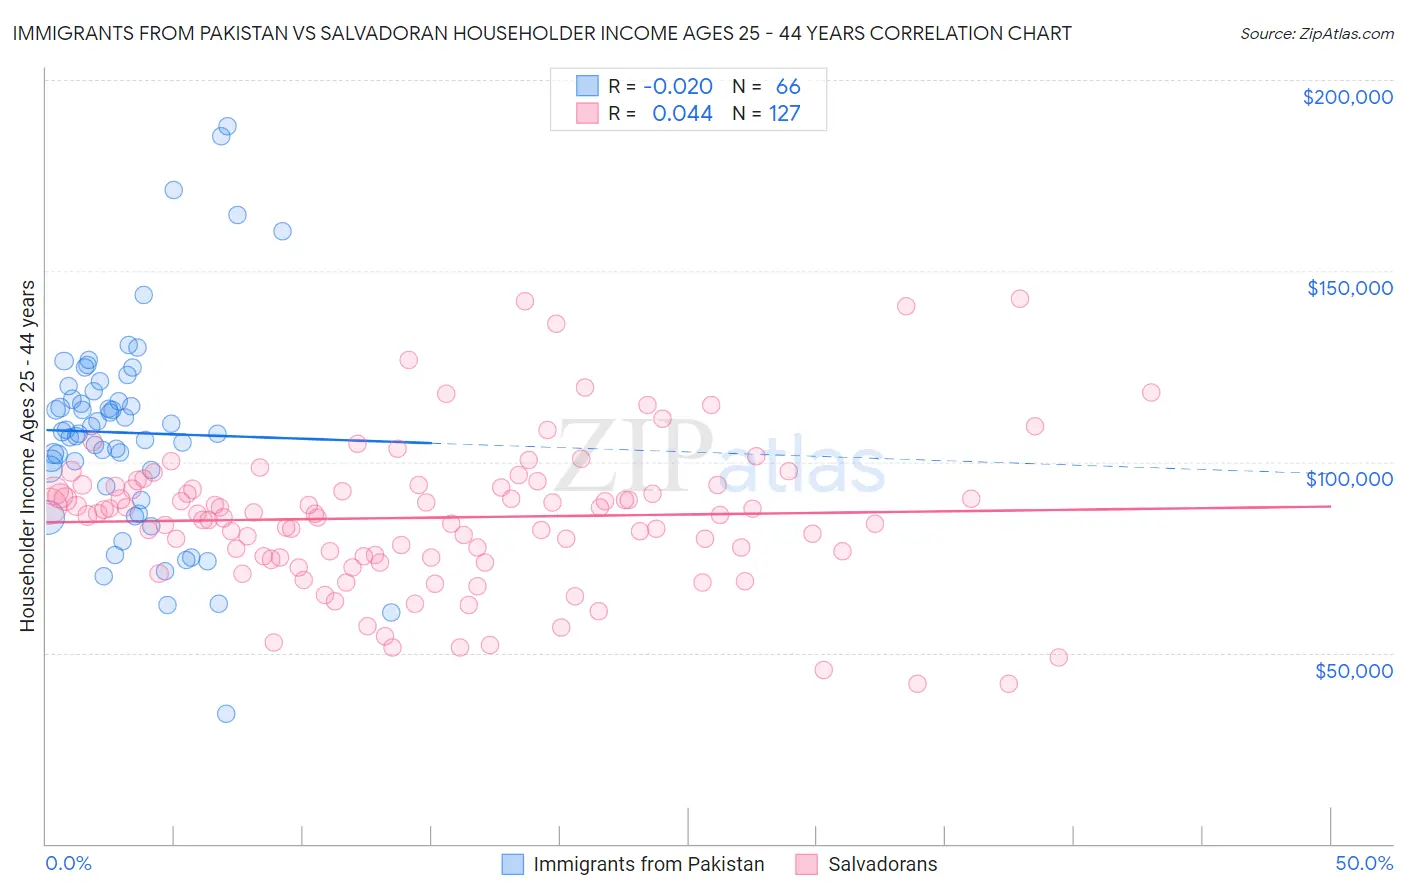 Immigrants from Pakistan vs Salvadoran Householder Income Ages 25 - 44 years